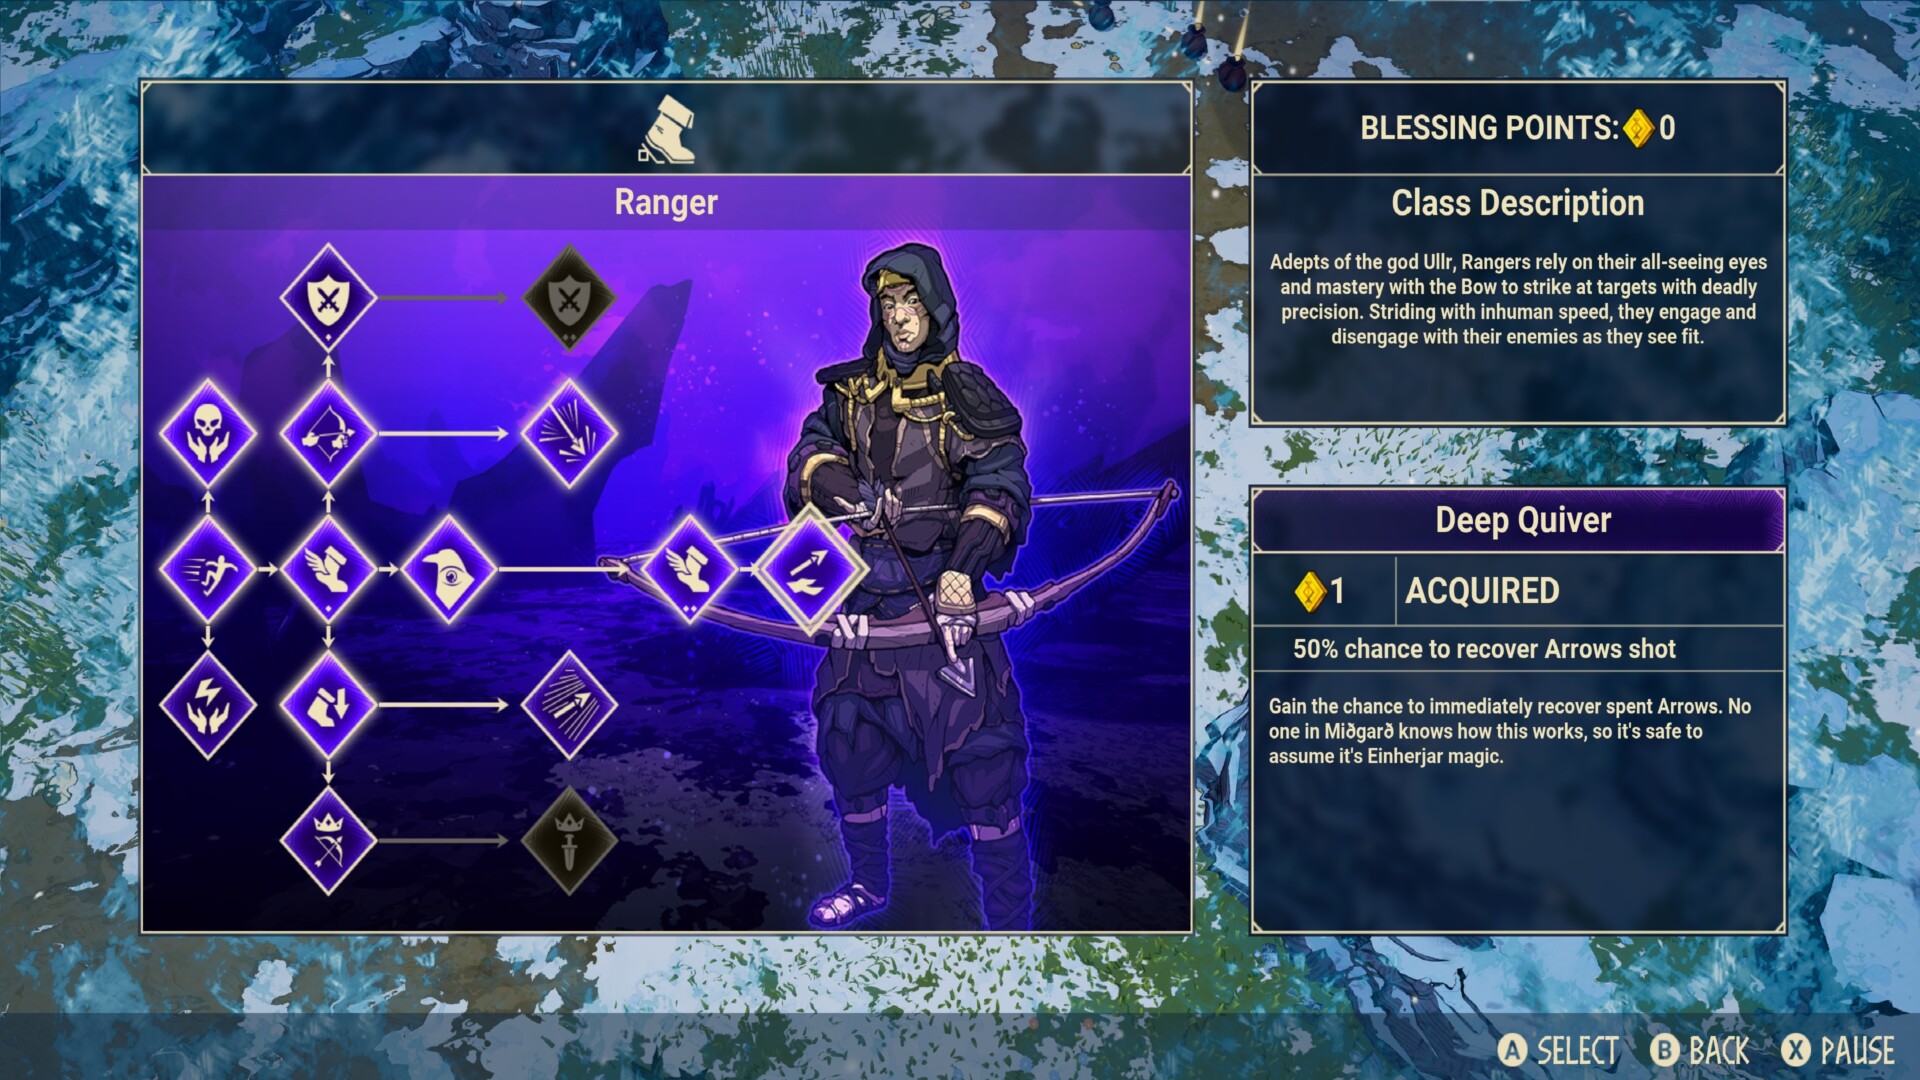 Tribes of Midgard classes – how to unlock each class